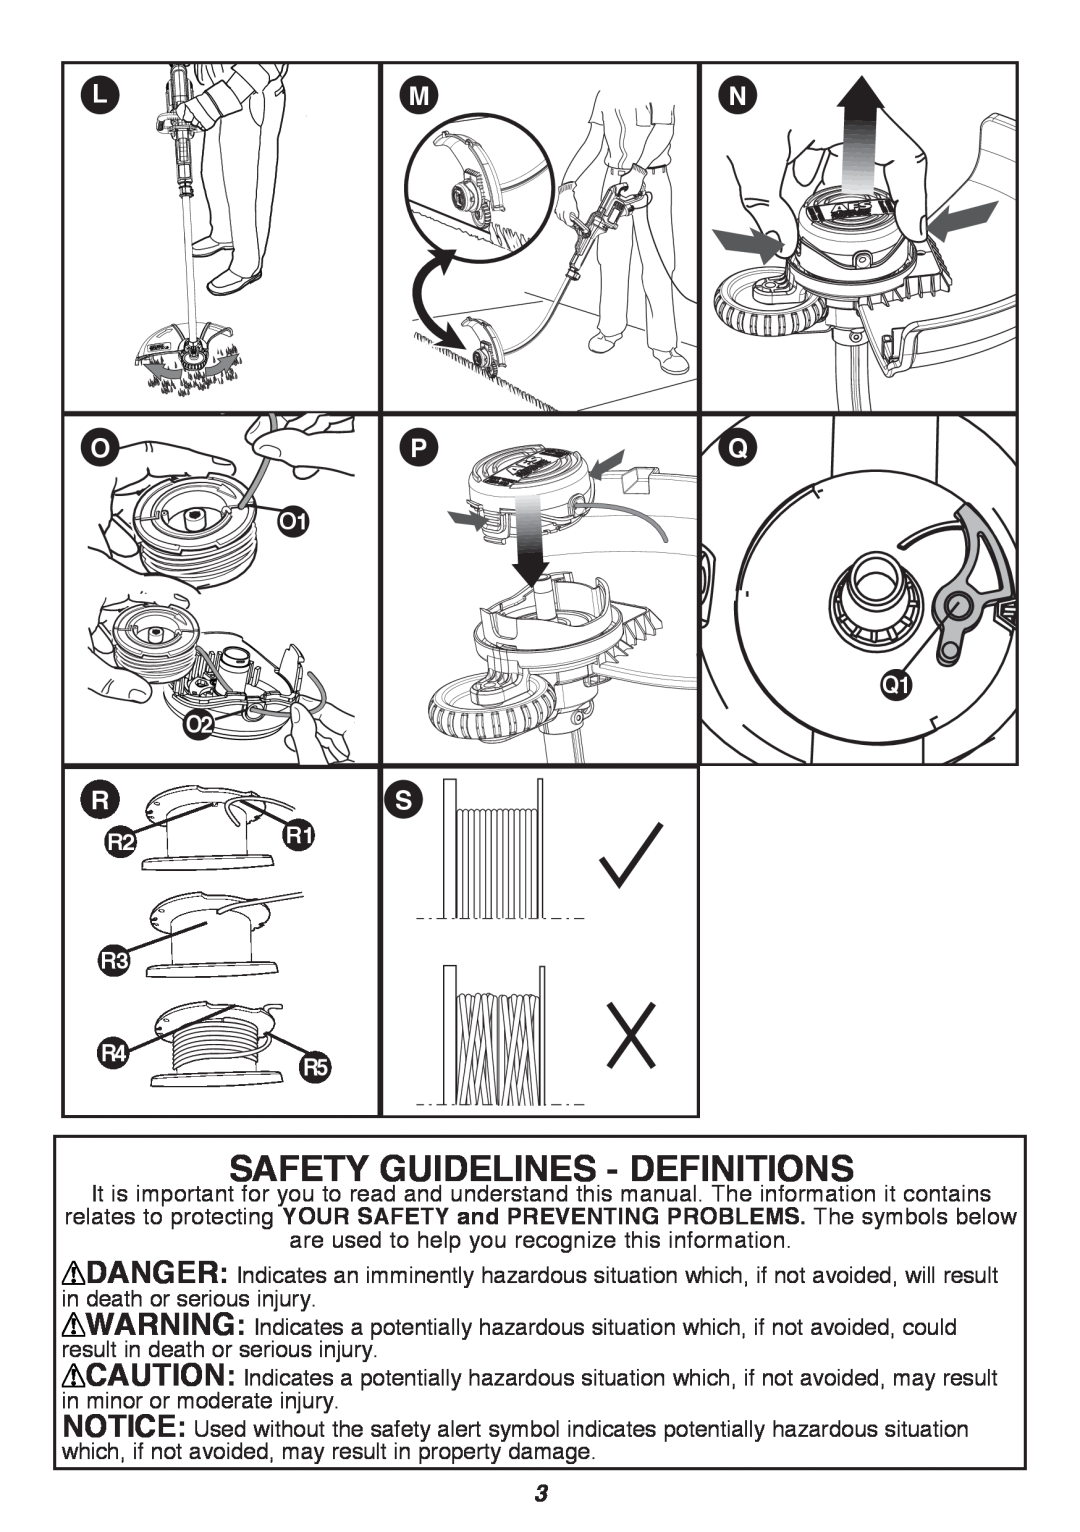 Black & Decker GH3000 instruction manual Safety Guidelines - Definitions 